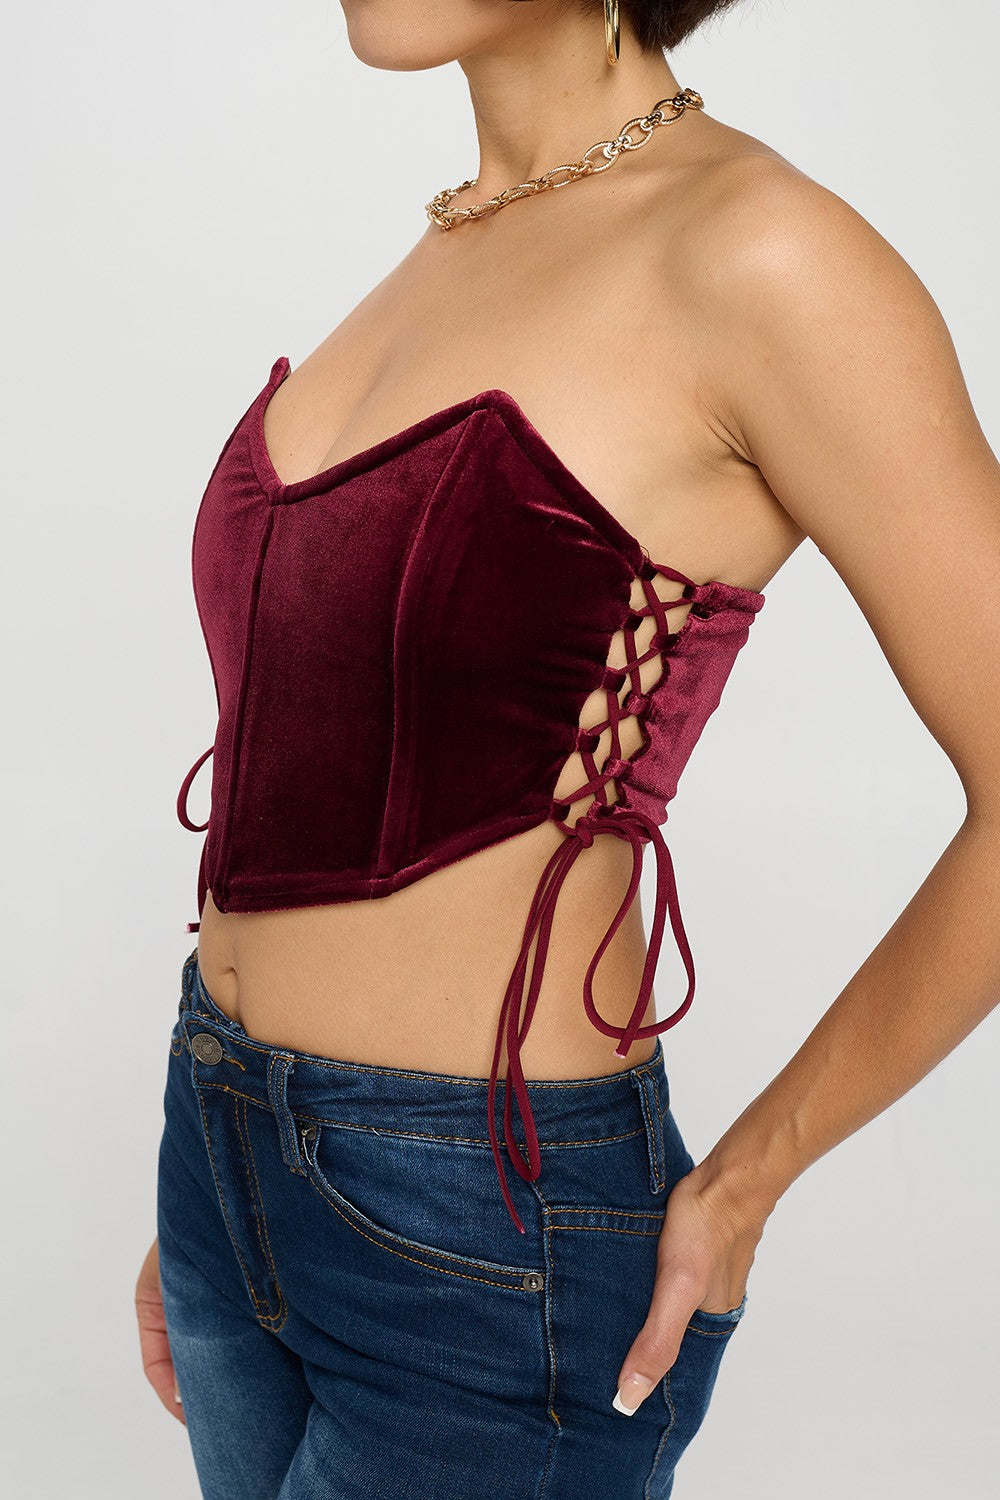 SIDE LACE UP DETAIL BONING BUSTIER TUBE TOP